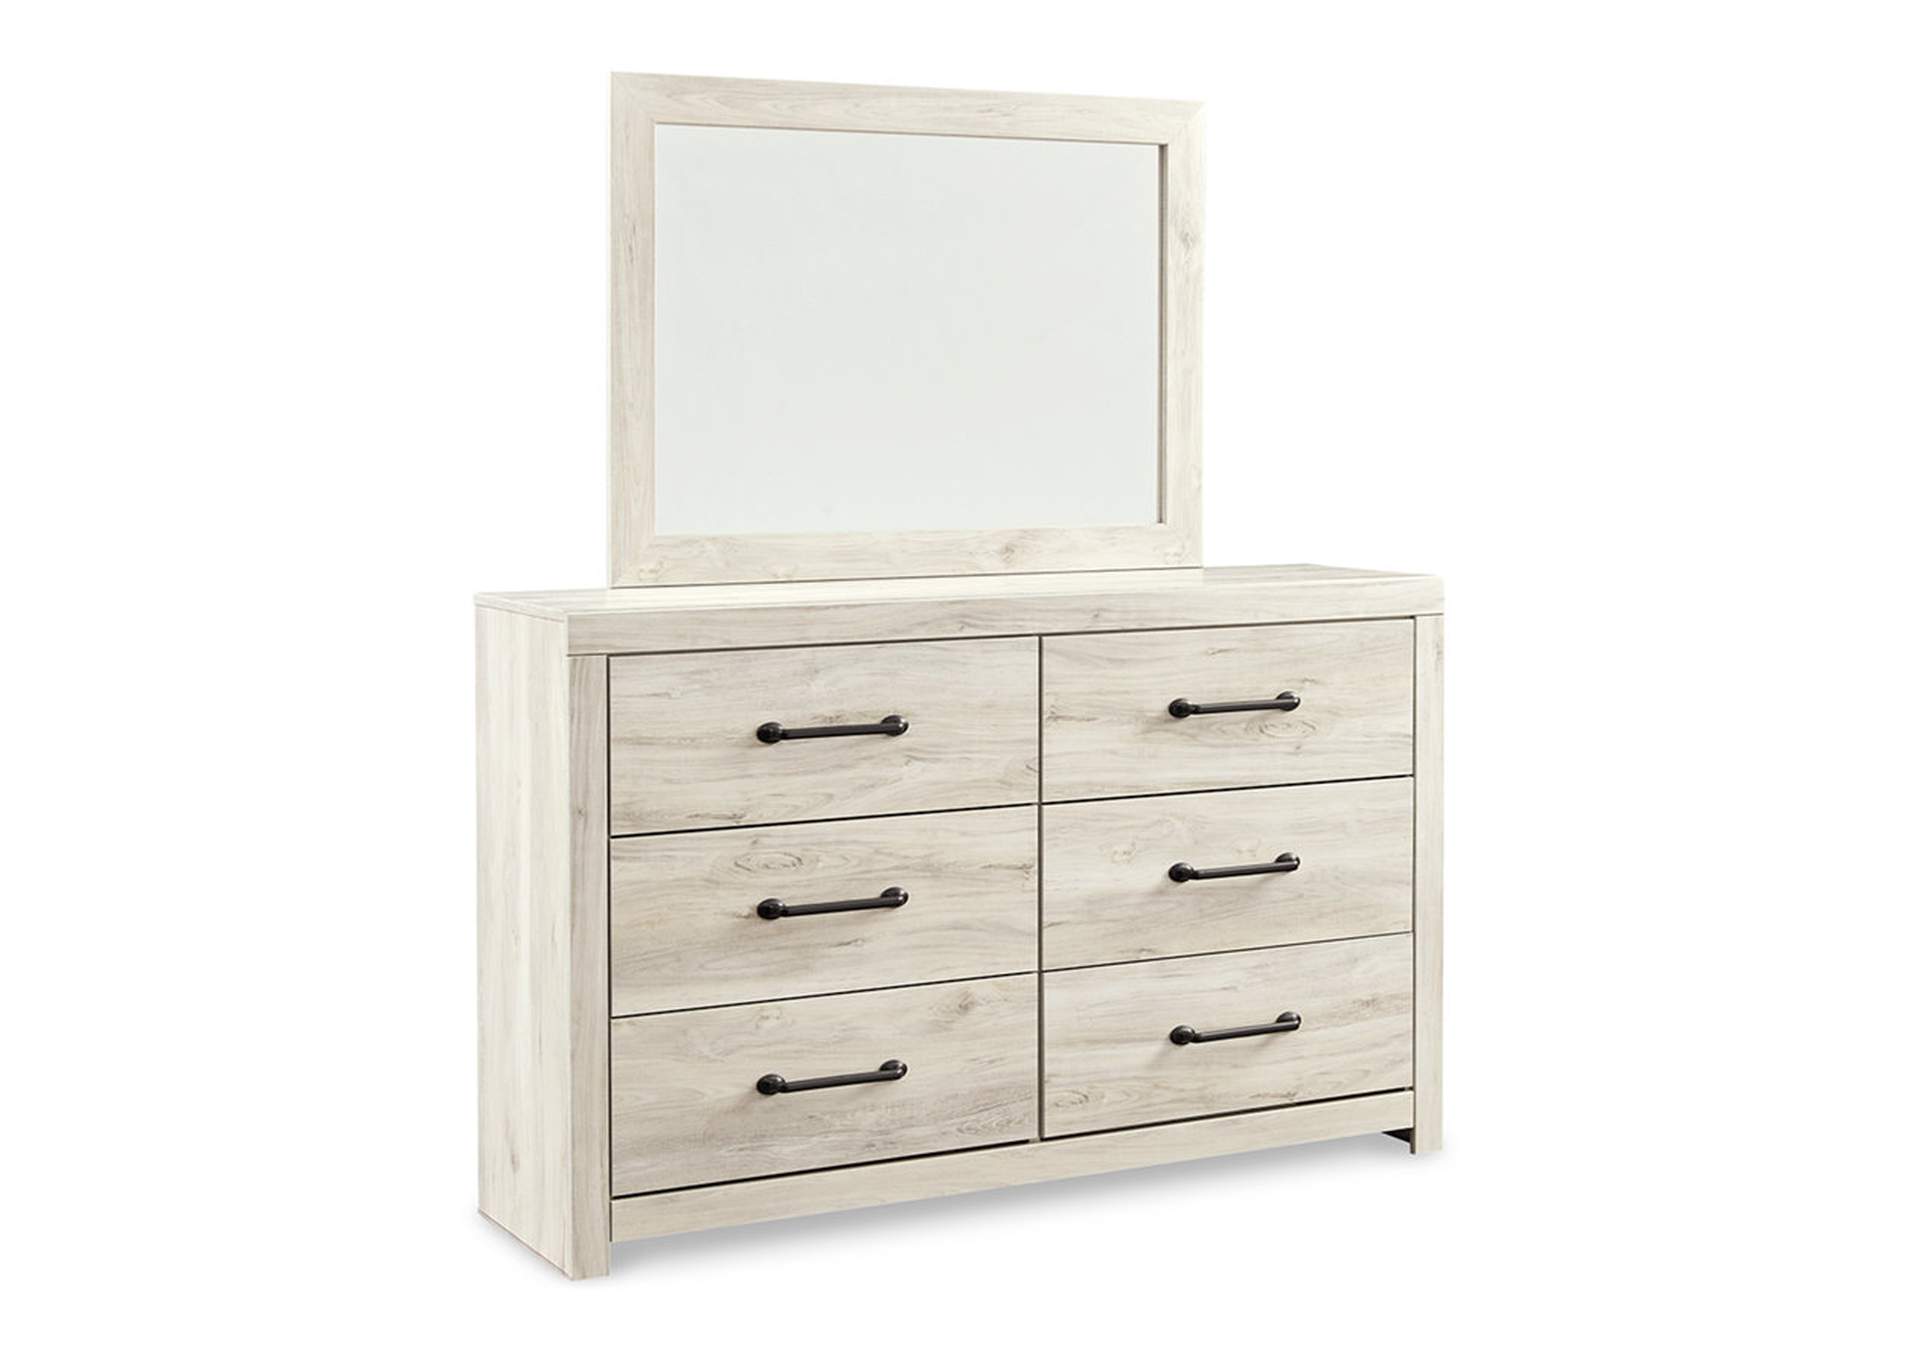 Cambeck Full Panel Storage Bed, Dresser, Mirror and Nightstand,Signature Design By Ashley